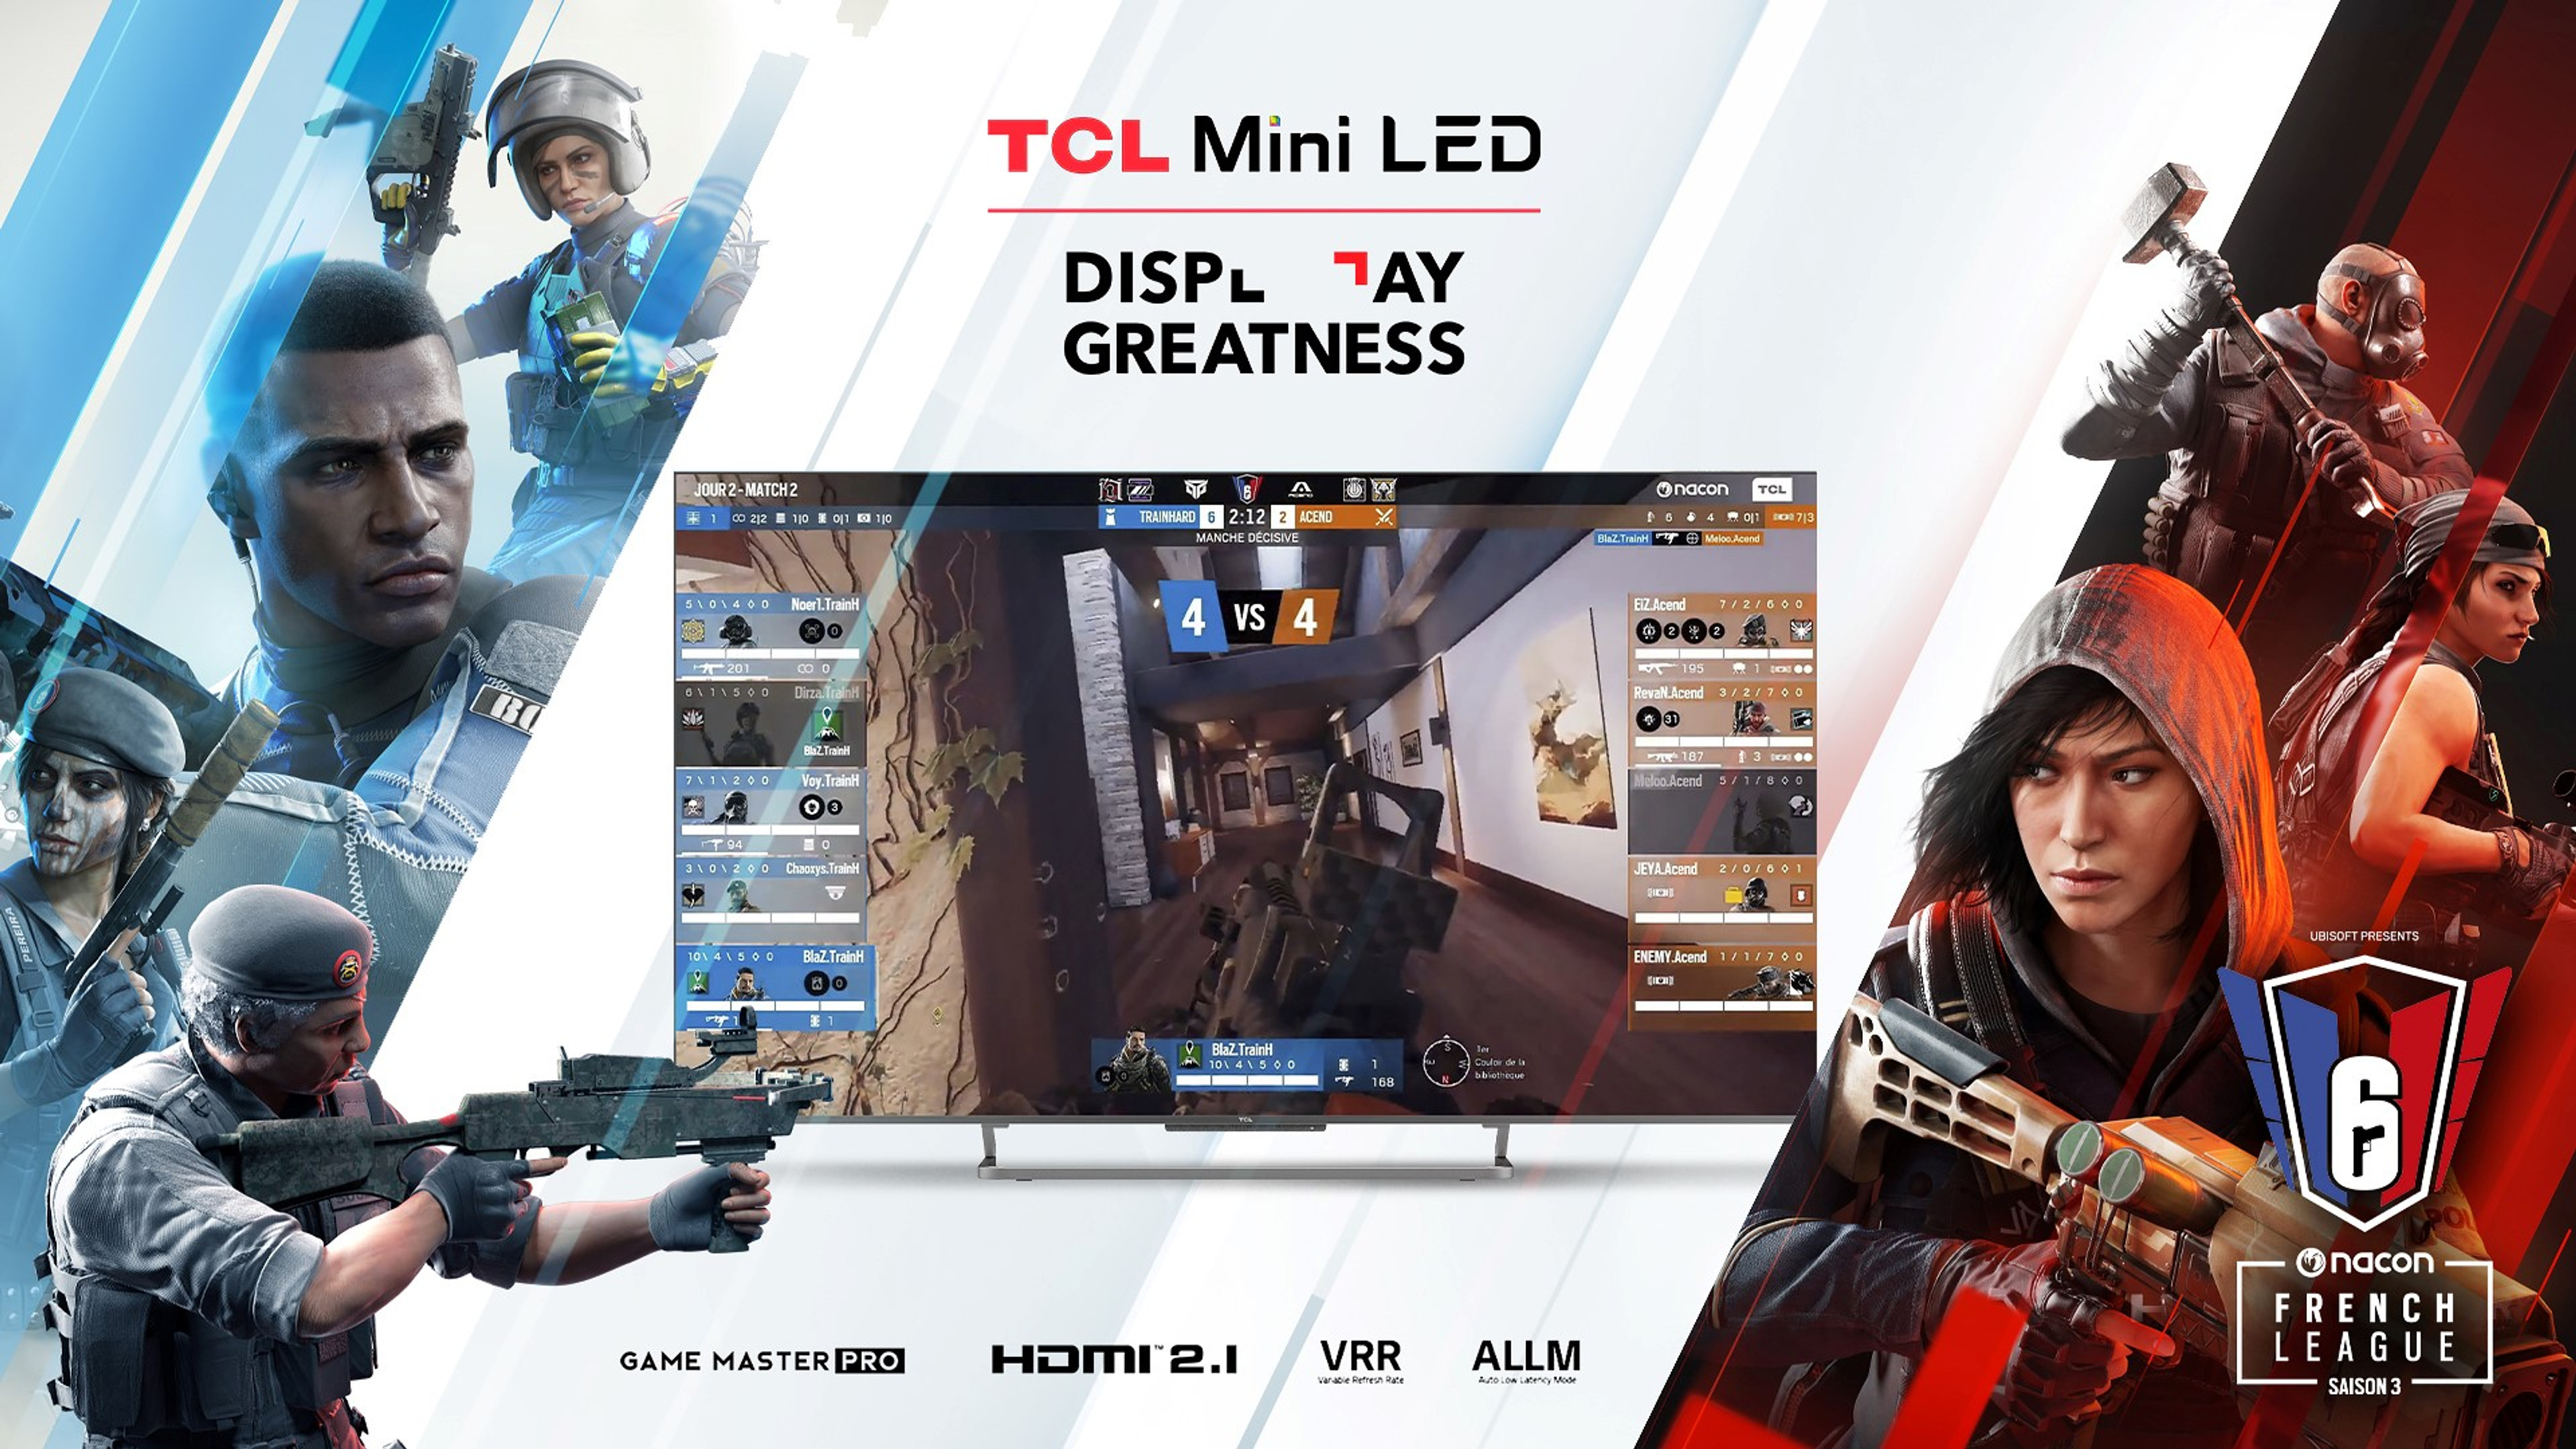 concours-r6-tcl-breakflip-gagner-une-television-2